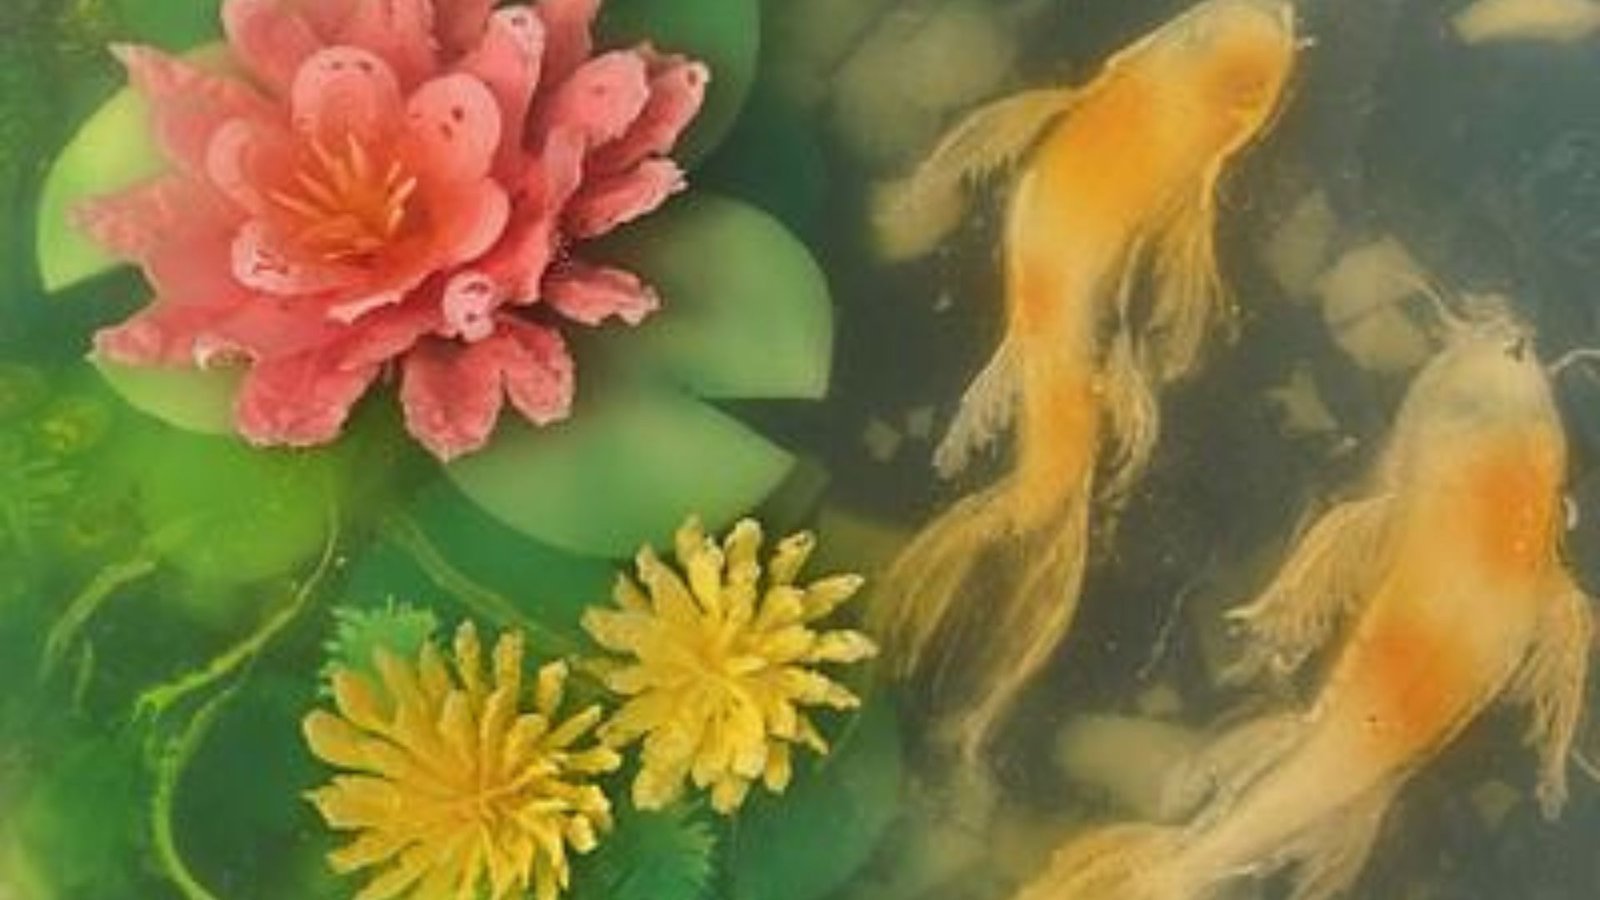 jelly art with fish images and plants 